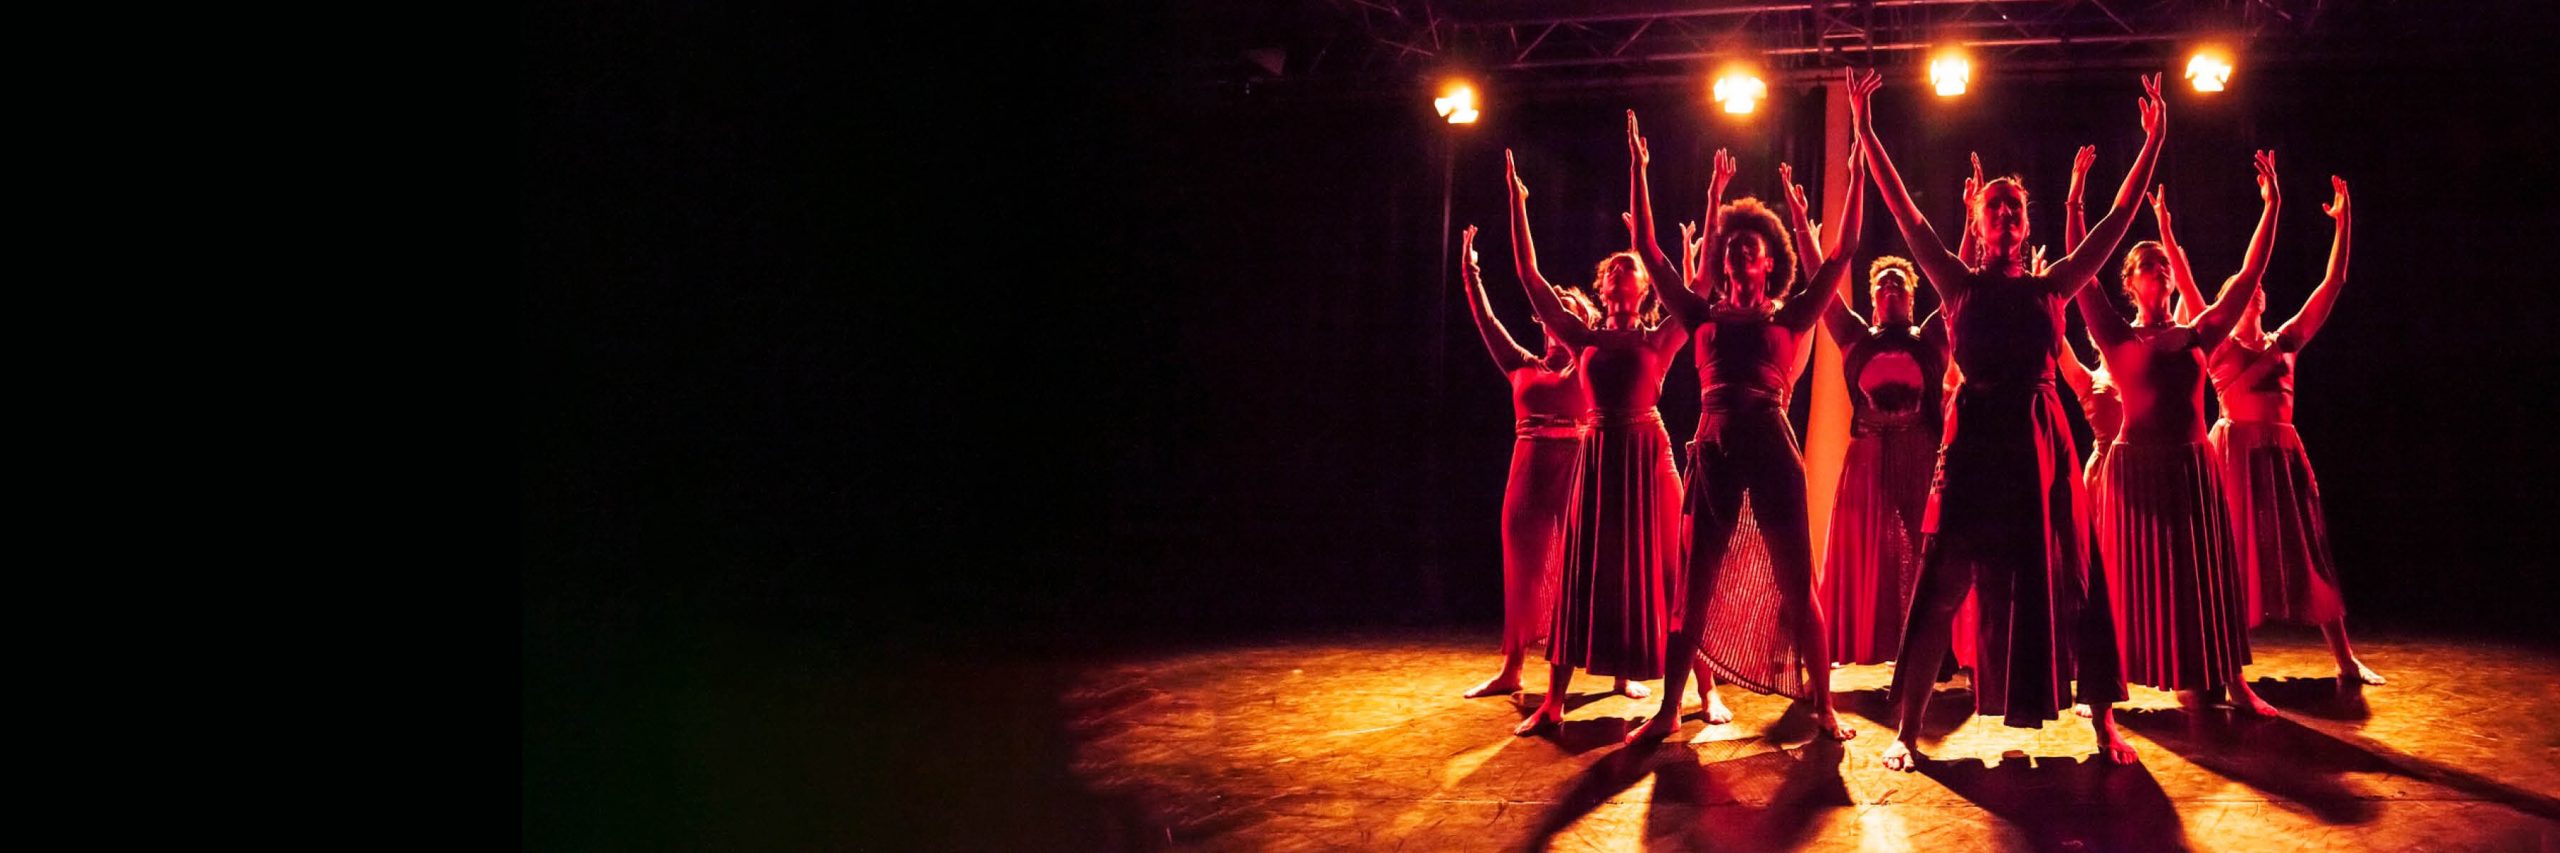 Promotional artwork for Spirit of Jazz: BOP Jazz Theatre Company. Seven dancers in various red outfits stand in a triangle formation with their arms in the air. They are on a stage, under golden spotlights.